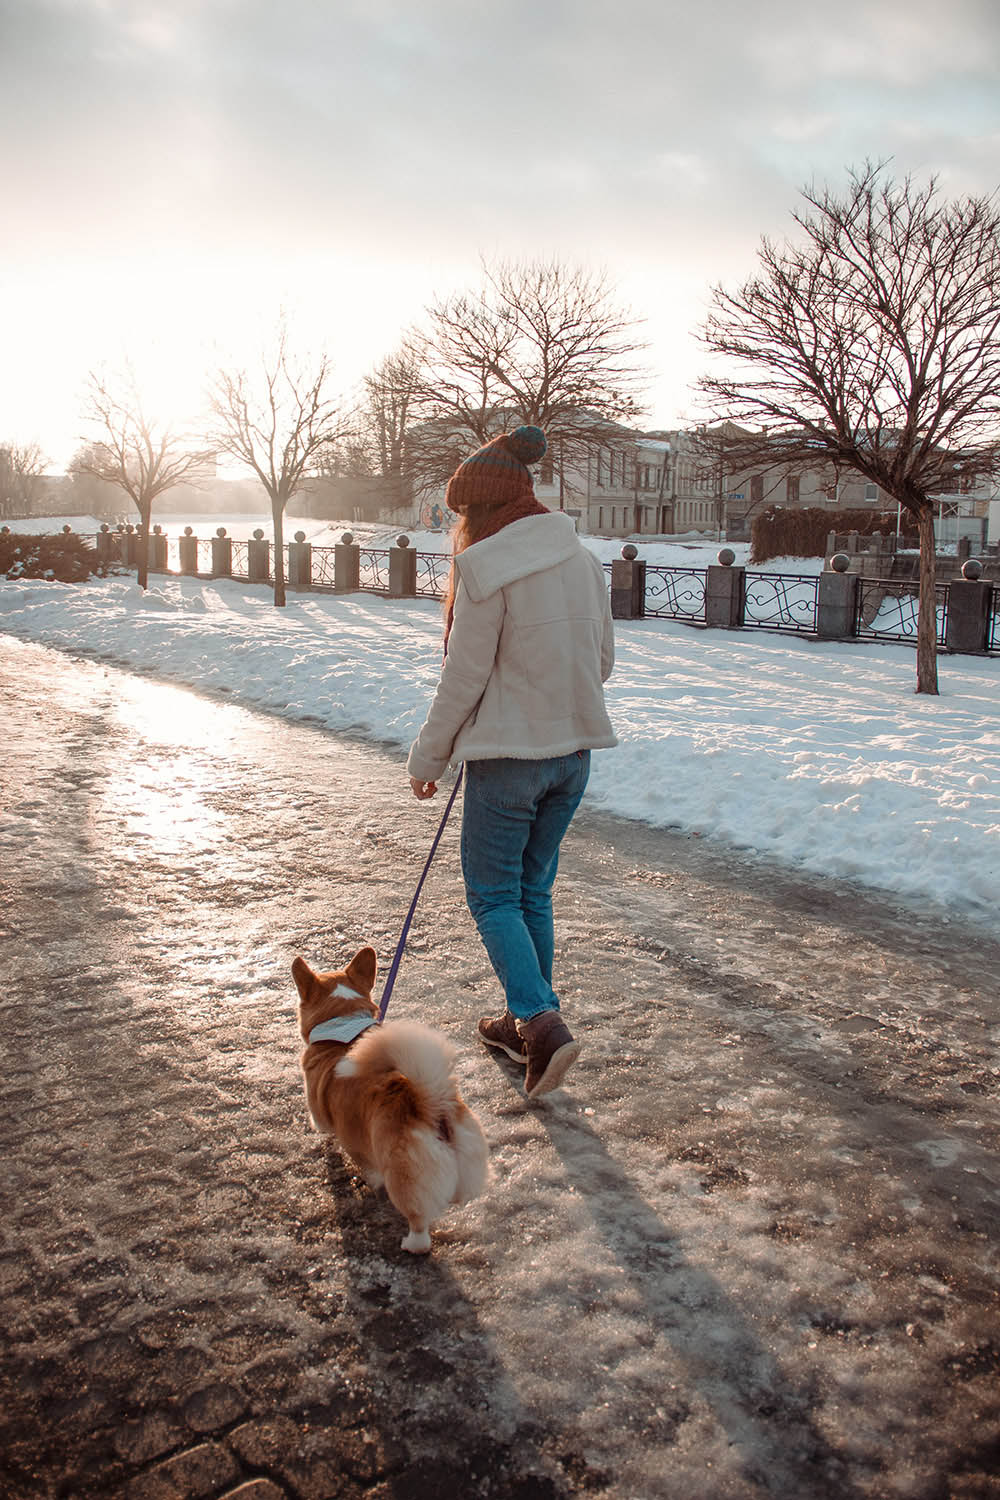 When Should You Walk The Dog